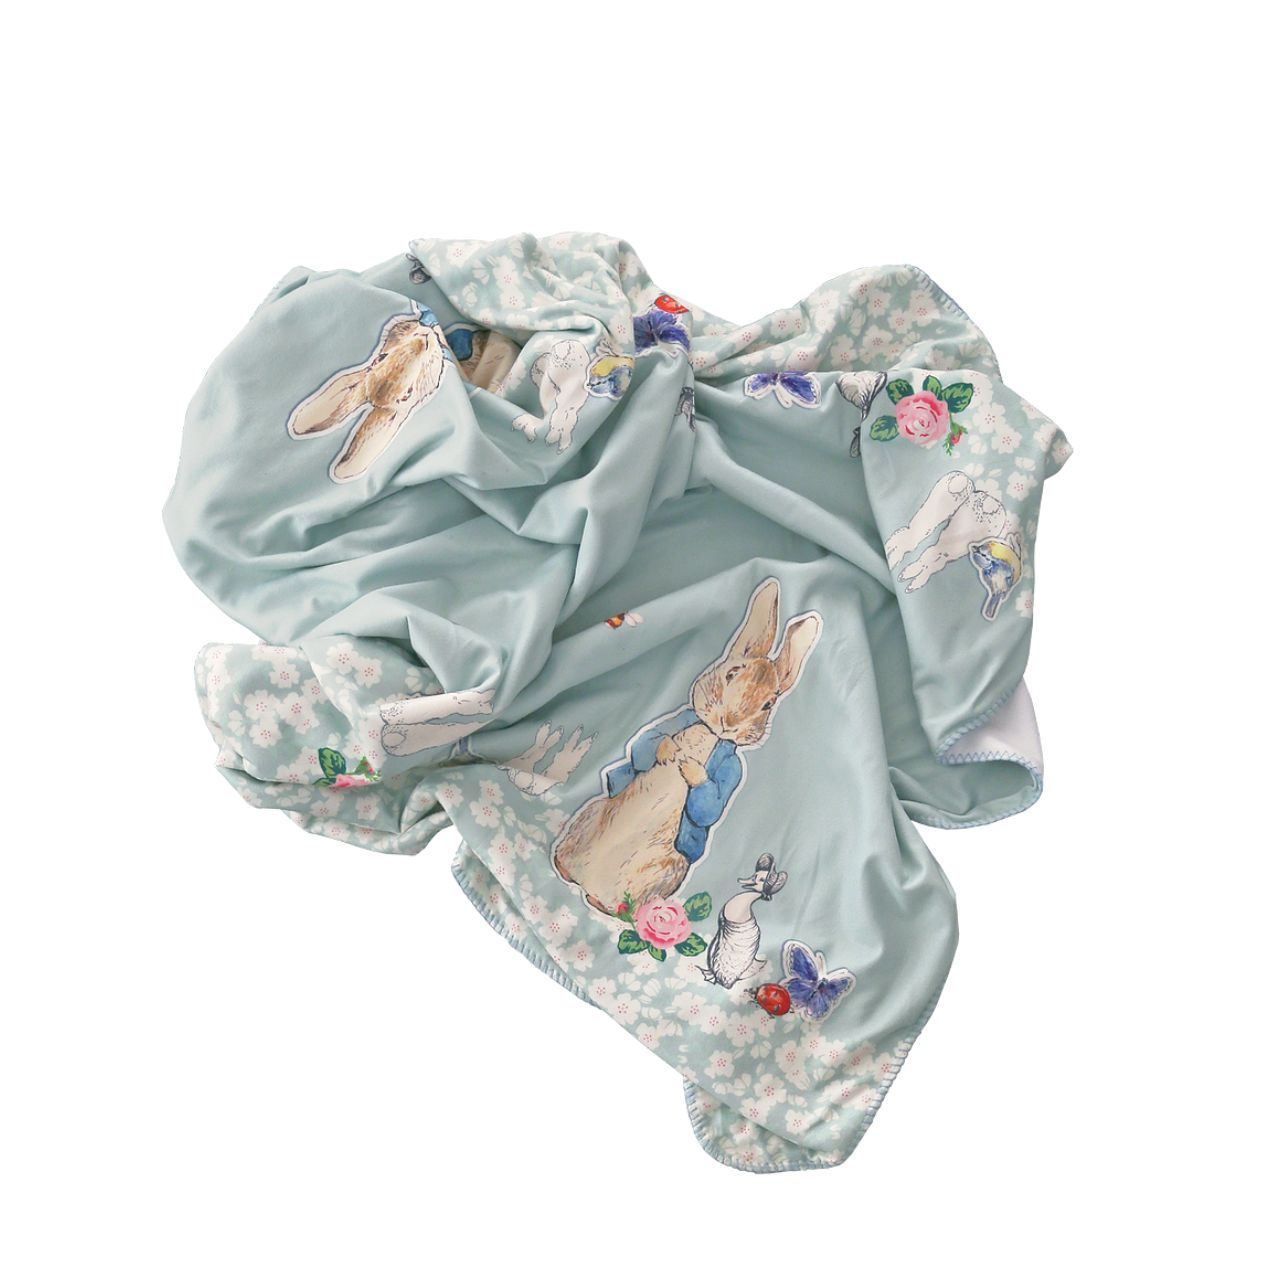 Beatrix Potter Peter Rabbit Pin Up Throw  Following on from our Best-Selling Peter Rabbit Adult Accessories Collection, we have created this beautiful Peter Rabbit Pin Up Throw. This throw has been finished in a super-soft and snuggly fabric and will make the perfect edition to your favourite room. 